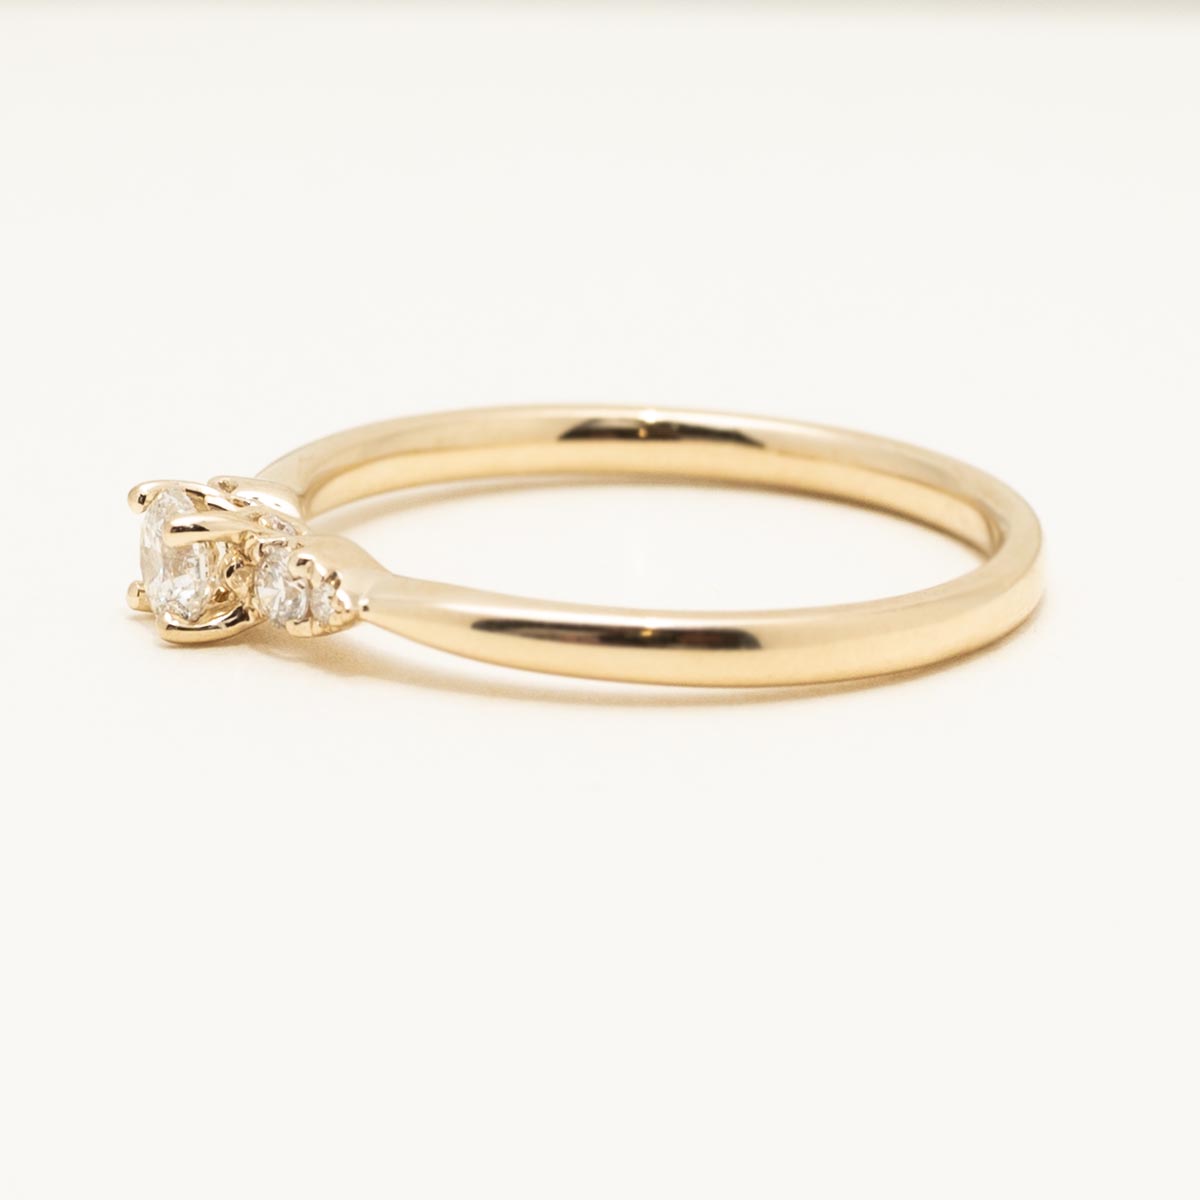 Northern Star Diamond Engagement Ring in 14kt Yellow Gold (1/3ct tw)